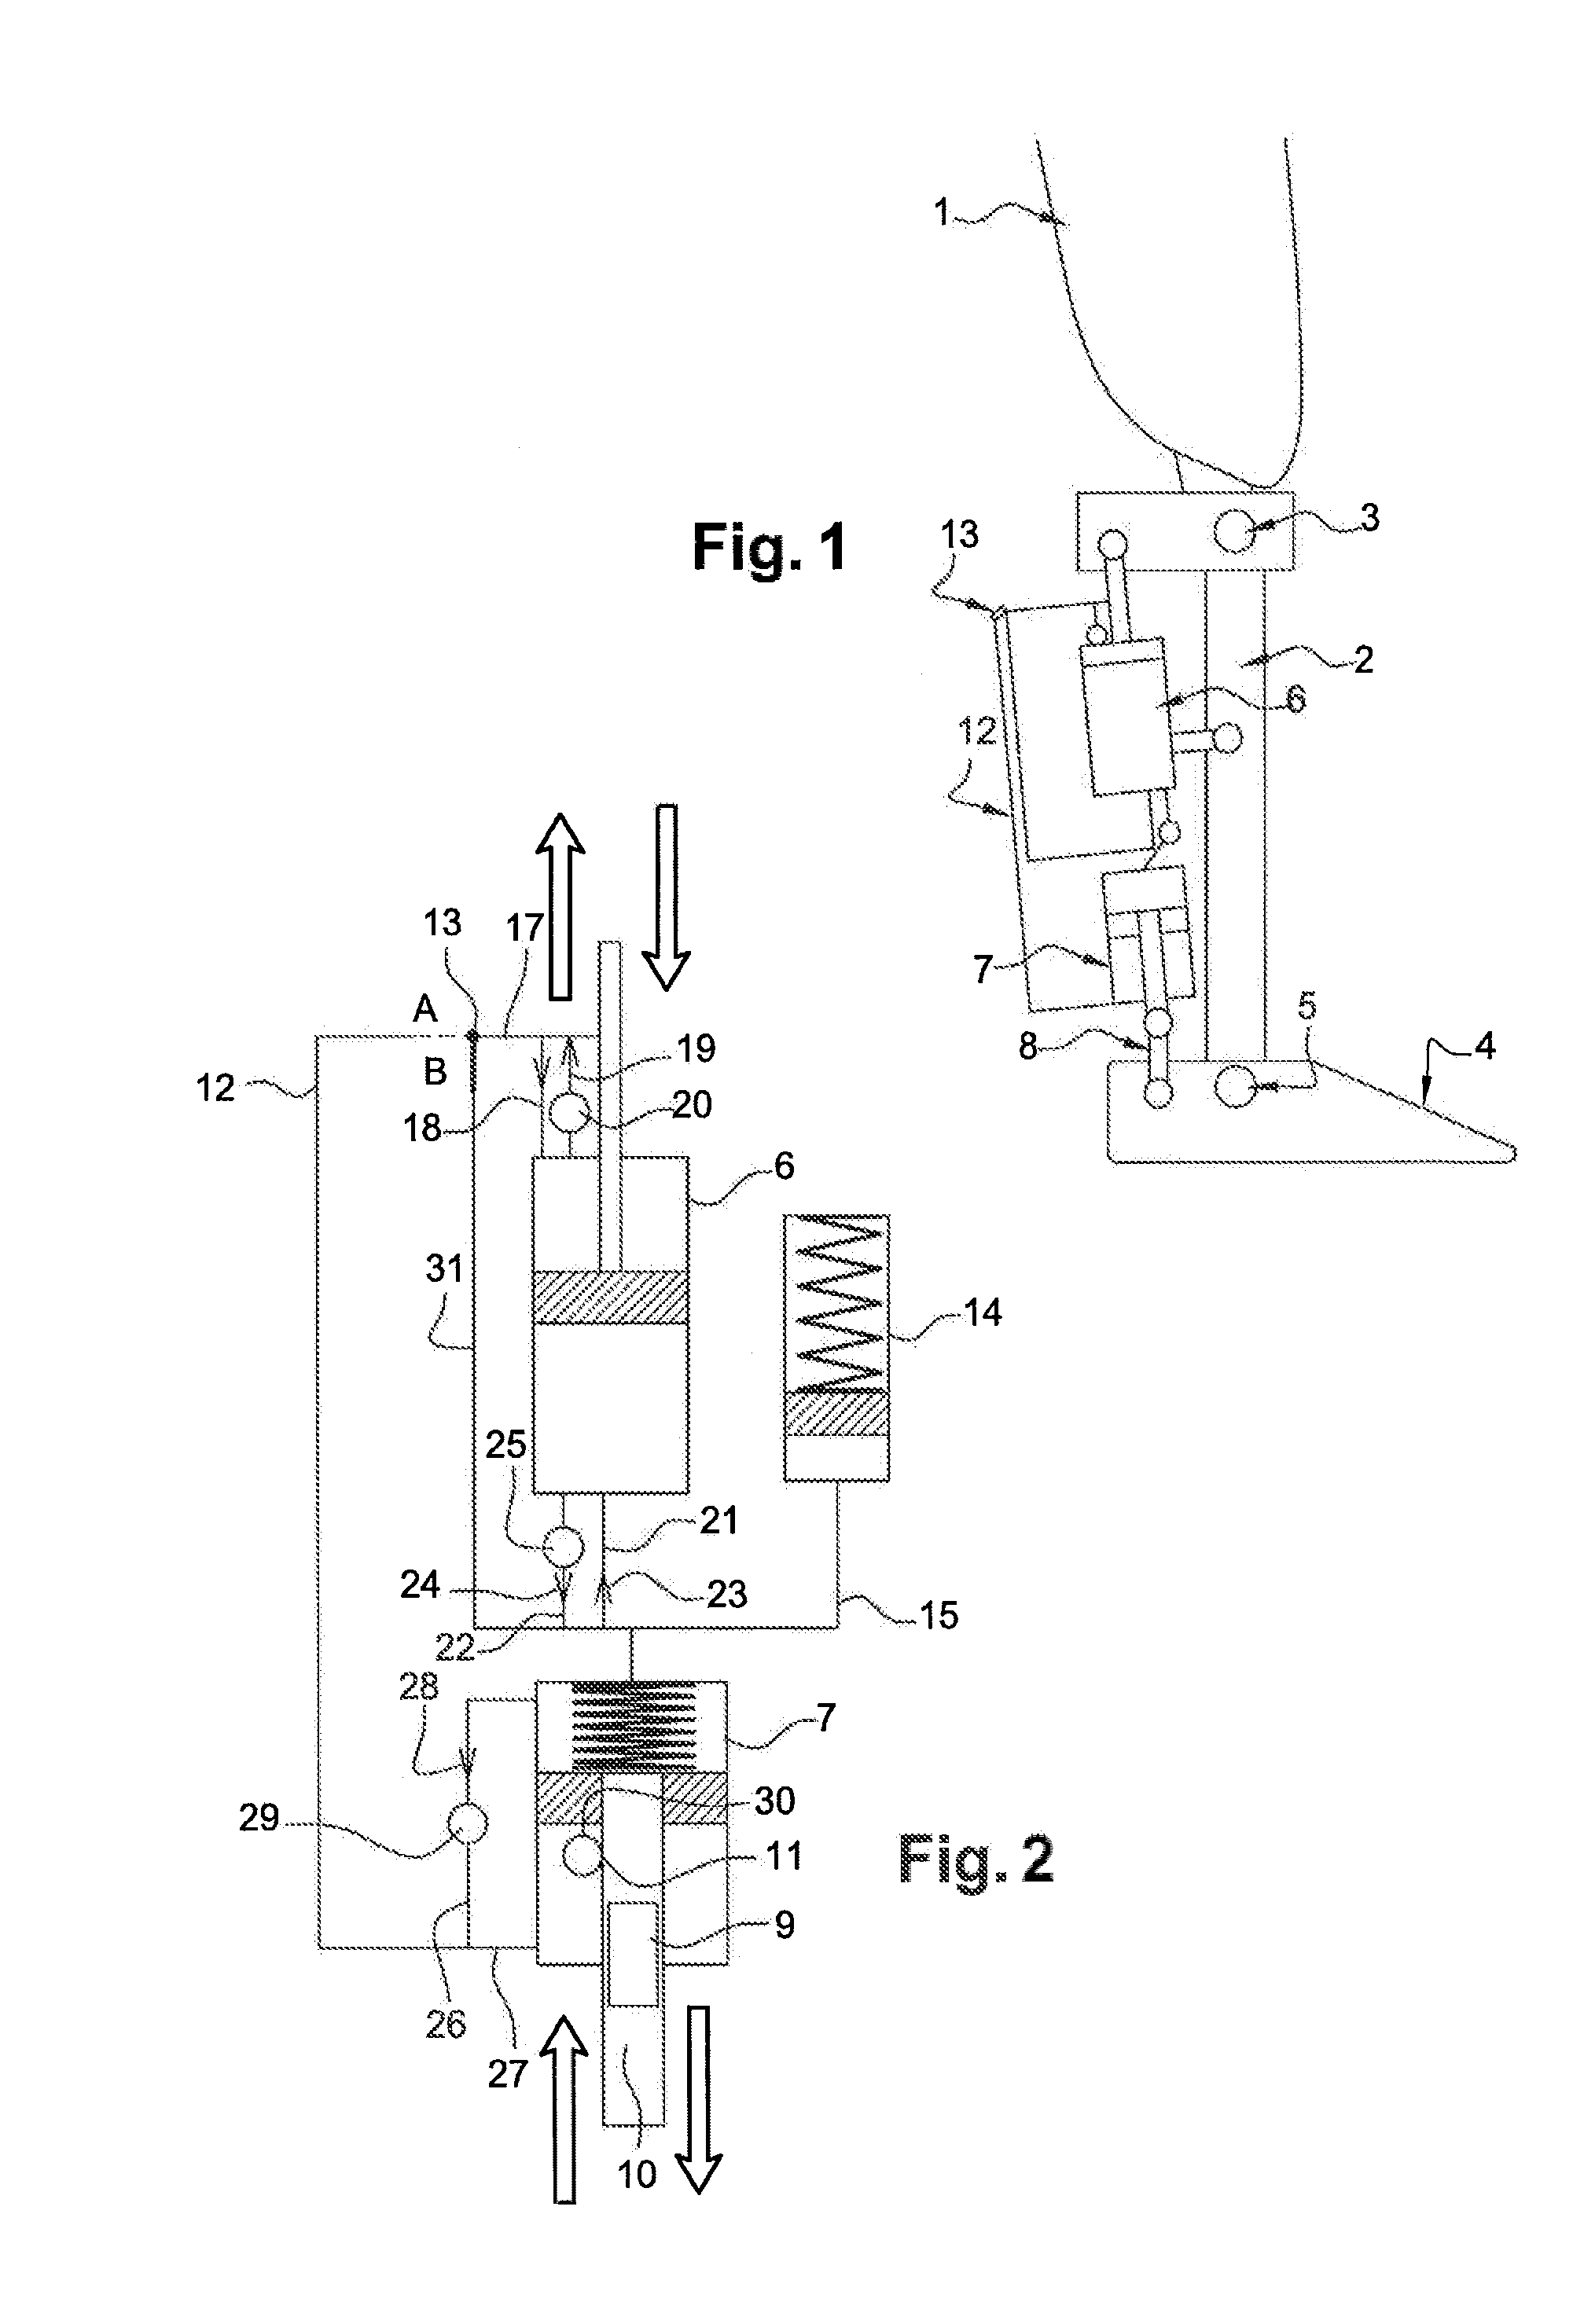 Hydraulic system for a knee-ankle assembly controlled by a microprocessor